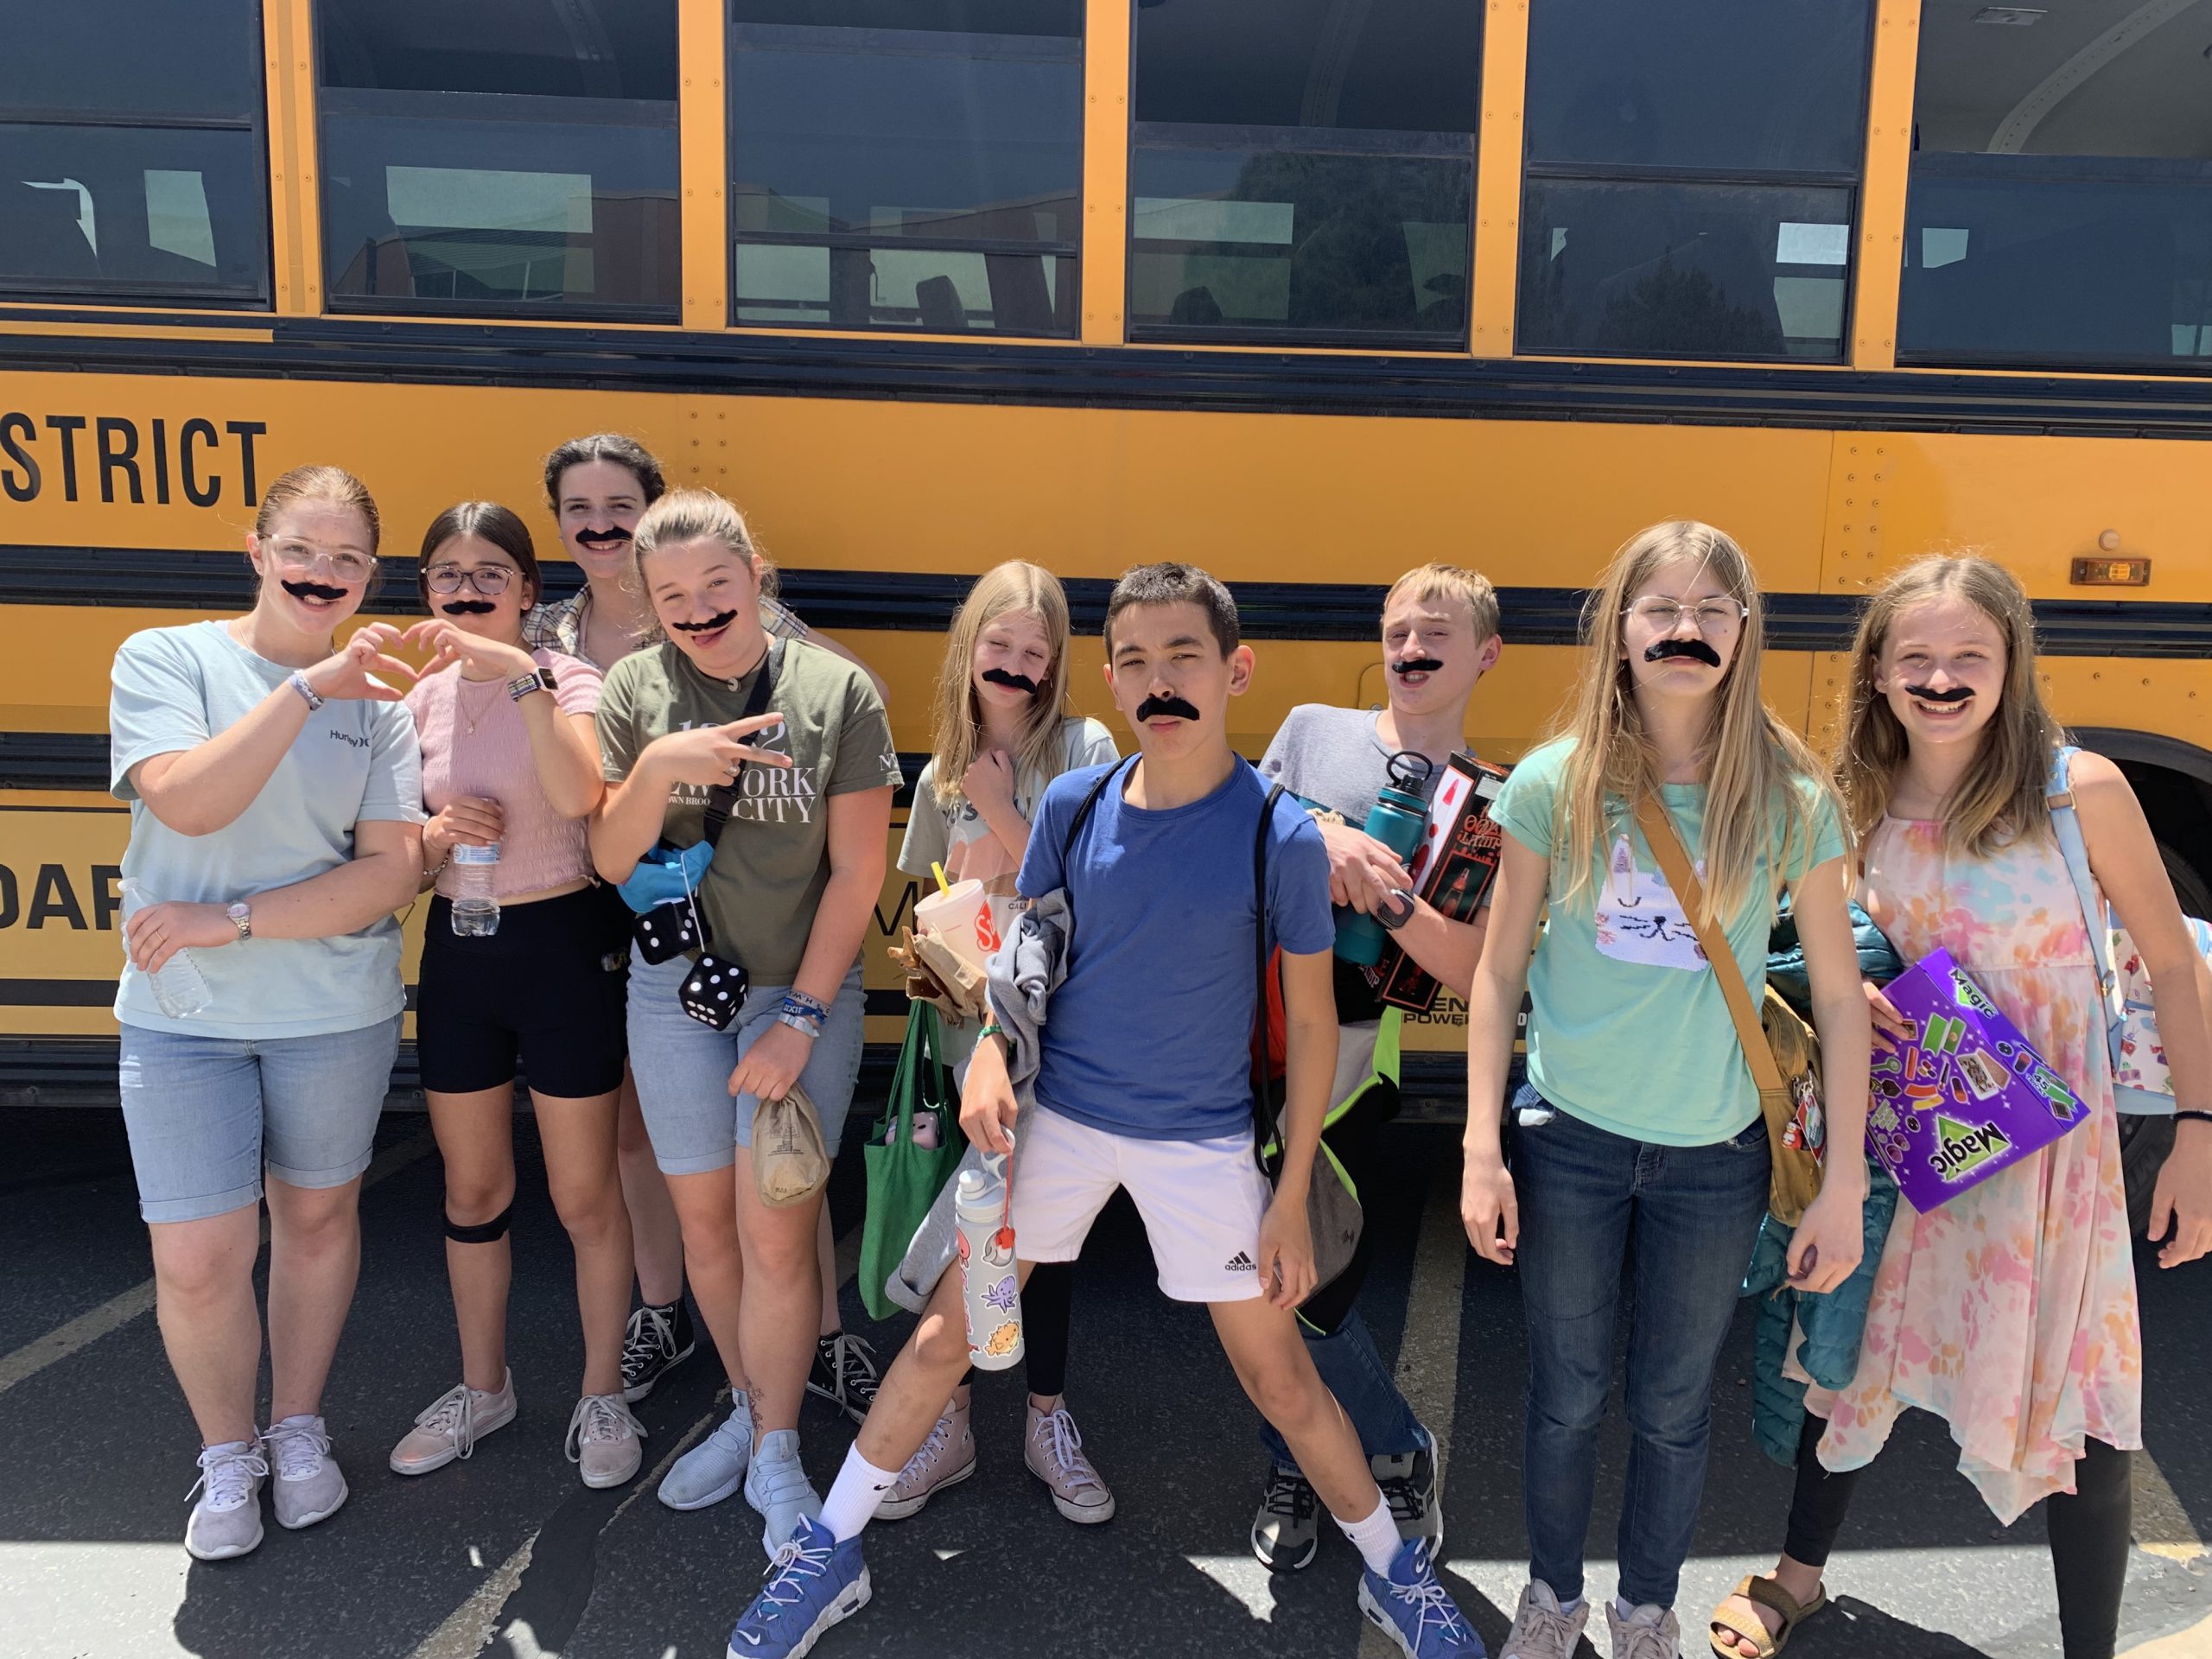 7th graders showing off their mustaches standing in front of the school bus.